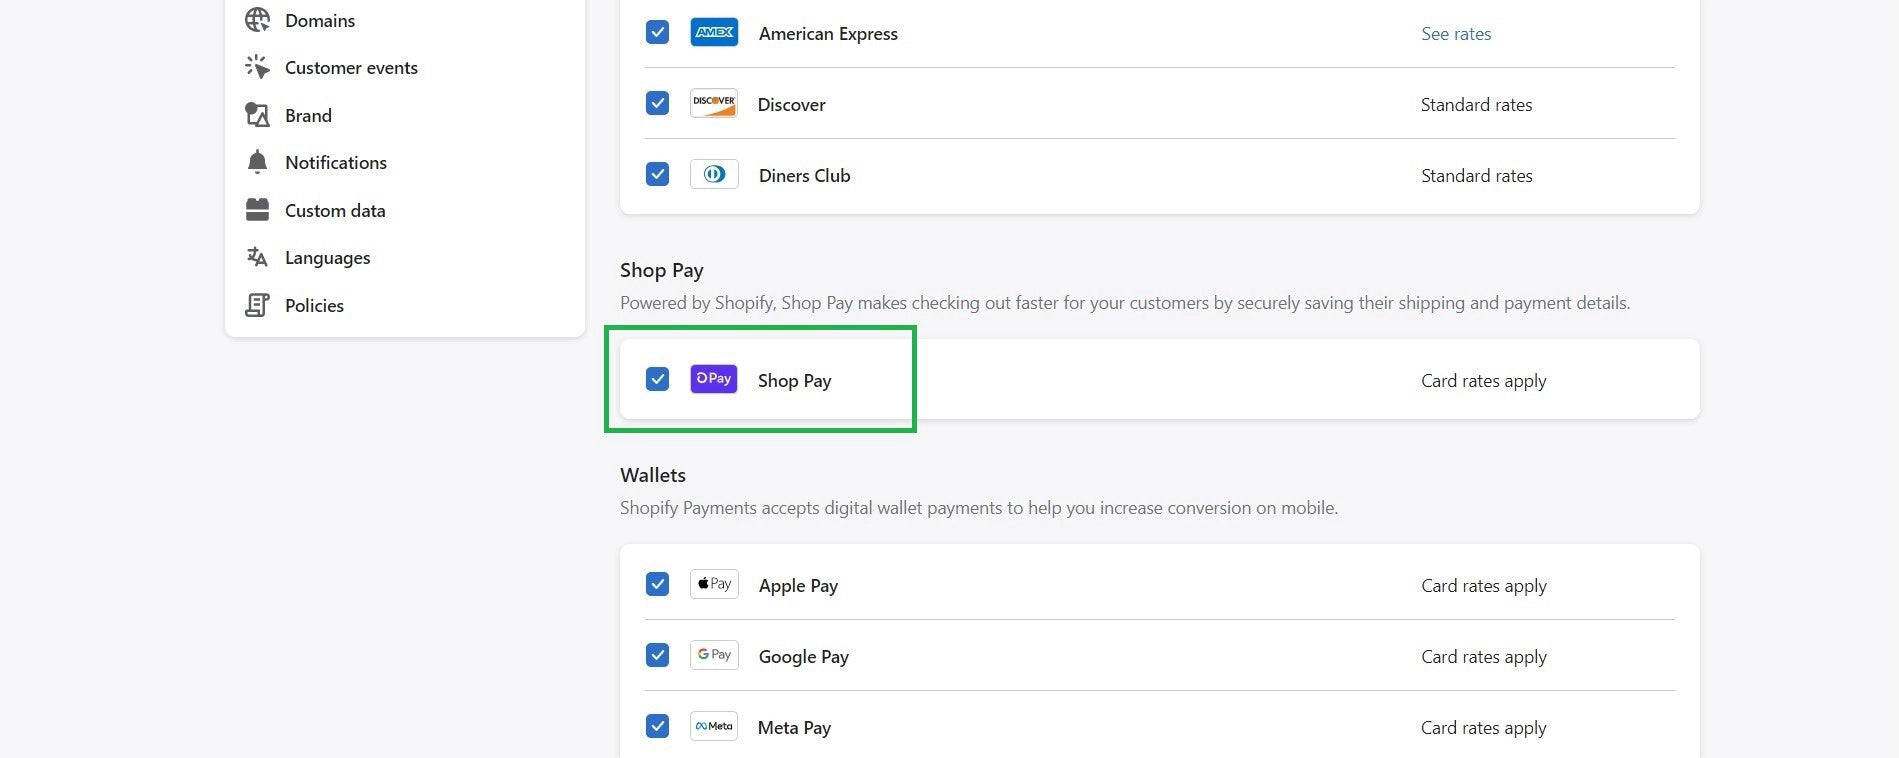 Shopify Settings - Payments